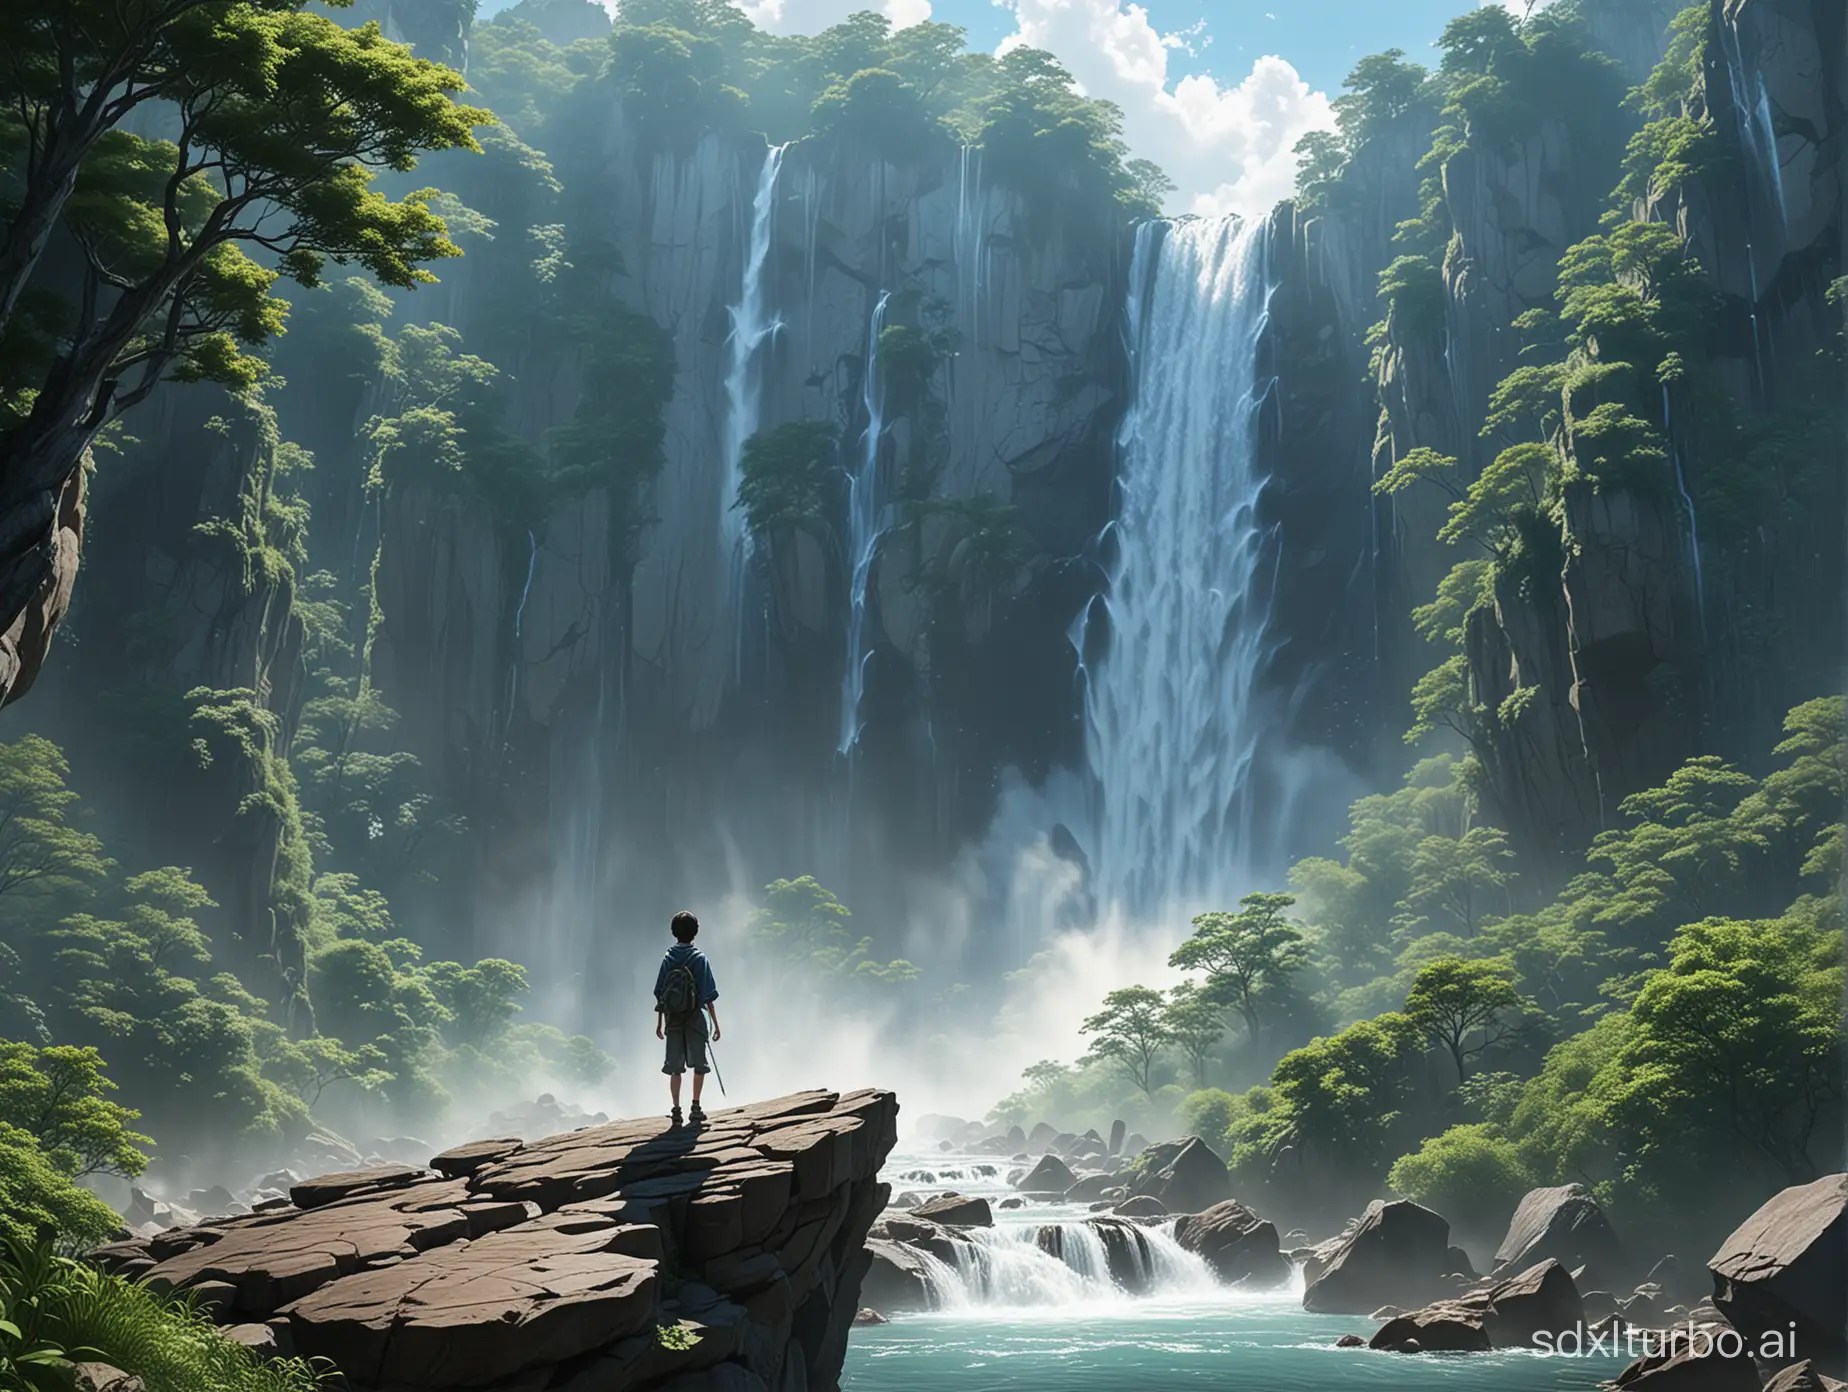 Japanese anime style，A breathtaking scene of a young boy standing on the edge of a majestic cliff, surrounded by the beauty of nature. The boy, with his back to the viewer, gazes at the stunning waterfall that cascades down the cliff, creating a refreshing mist. The lush greenery on the rocky terrain adds a sense of harmony with nature, while the bright blue sky above accentuates the serenity of the moment. The clear waterfall blends seamlessly with the sky, creating a mesmerizing visual effect. The overall atmosphere of the image is tranquil and awe-inspiring, evoking a deep appreciation for the natural world and its beauty.